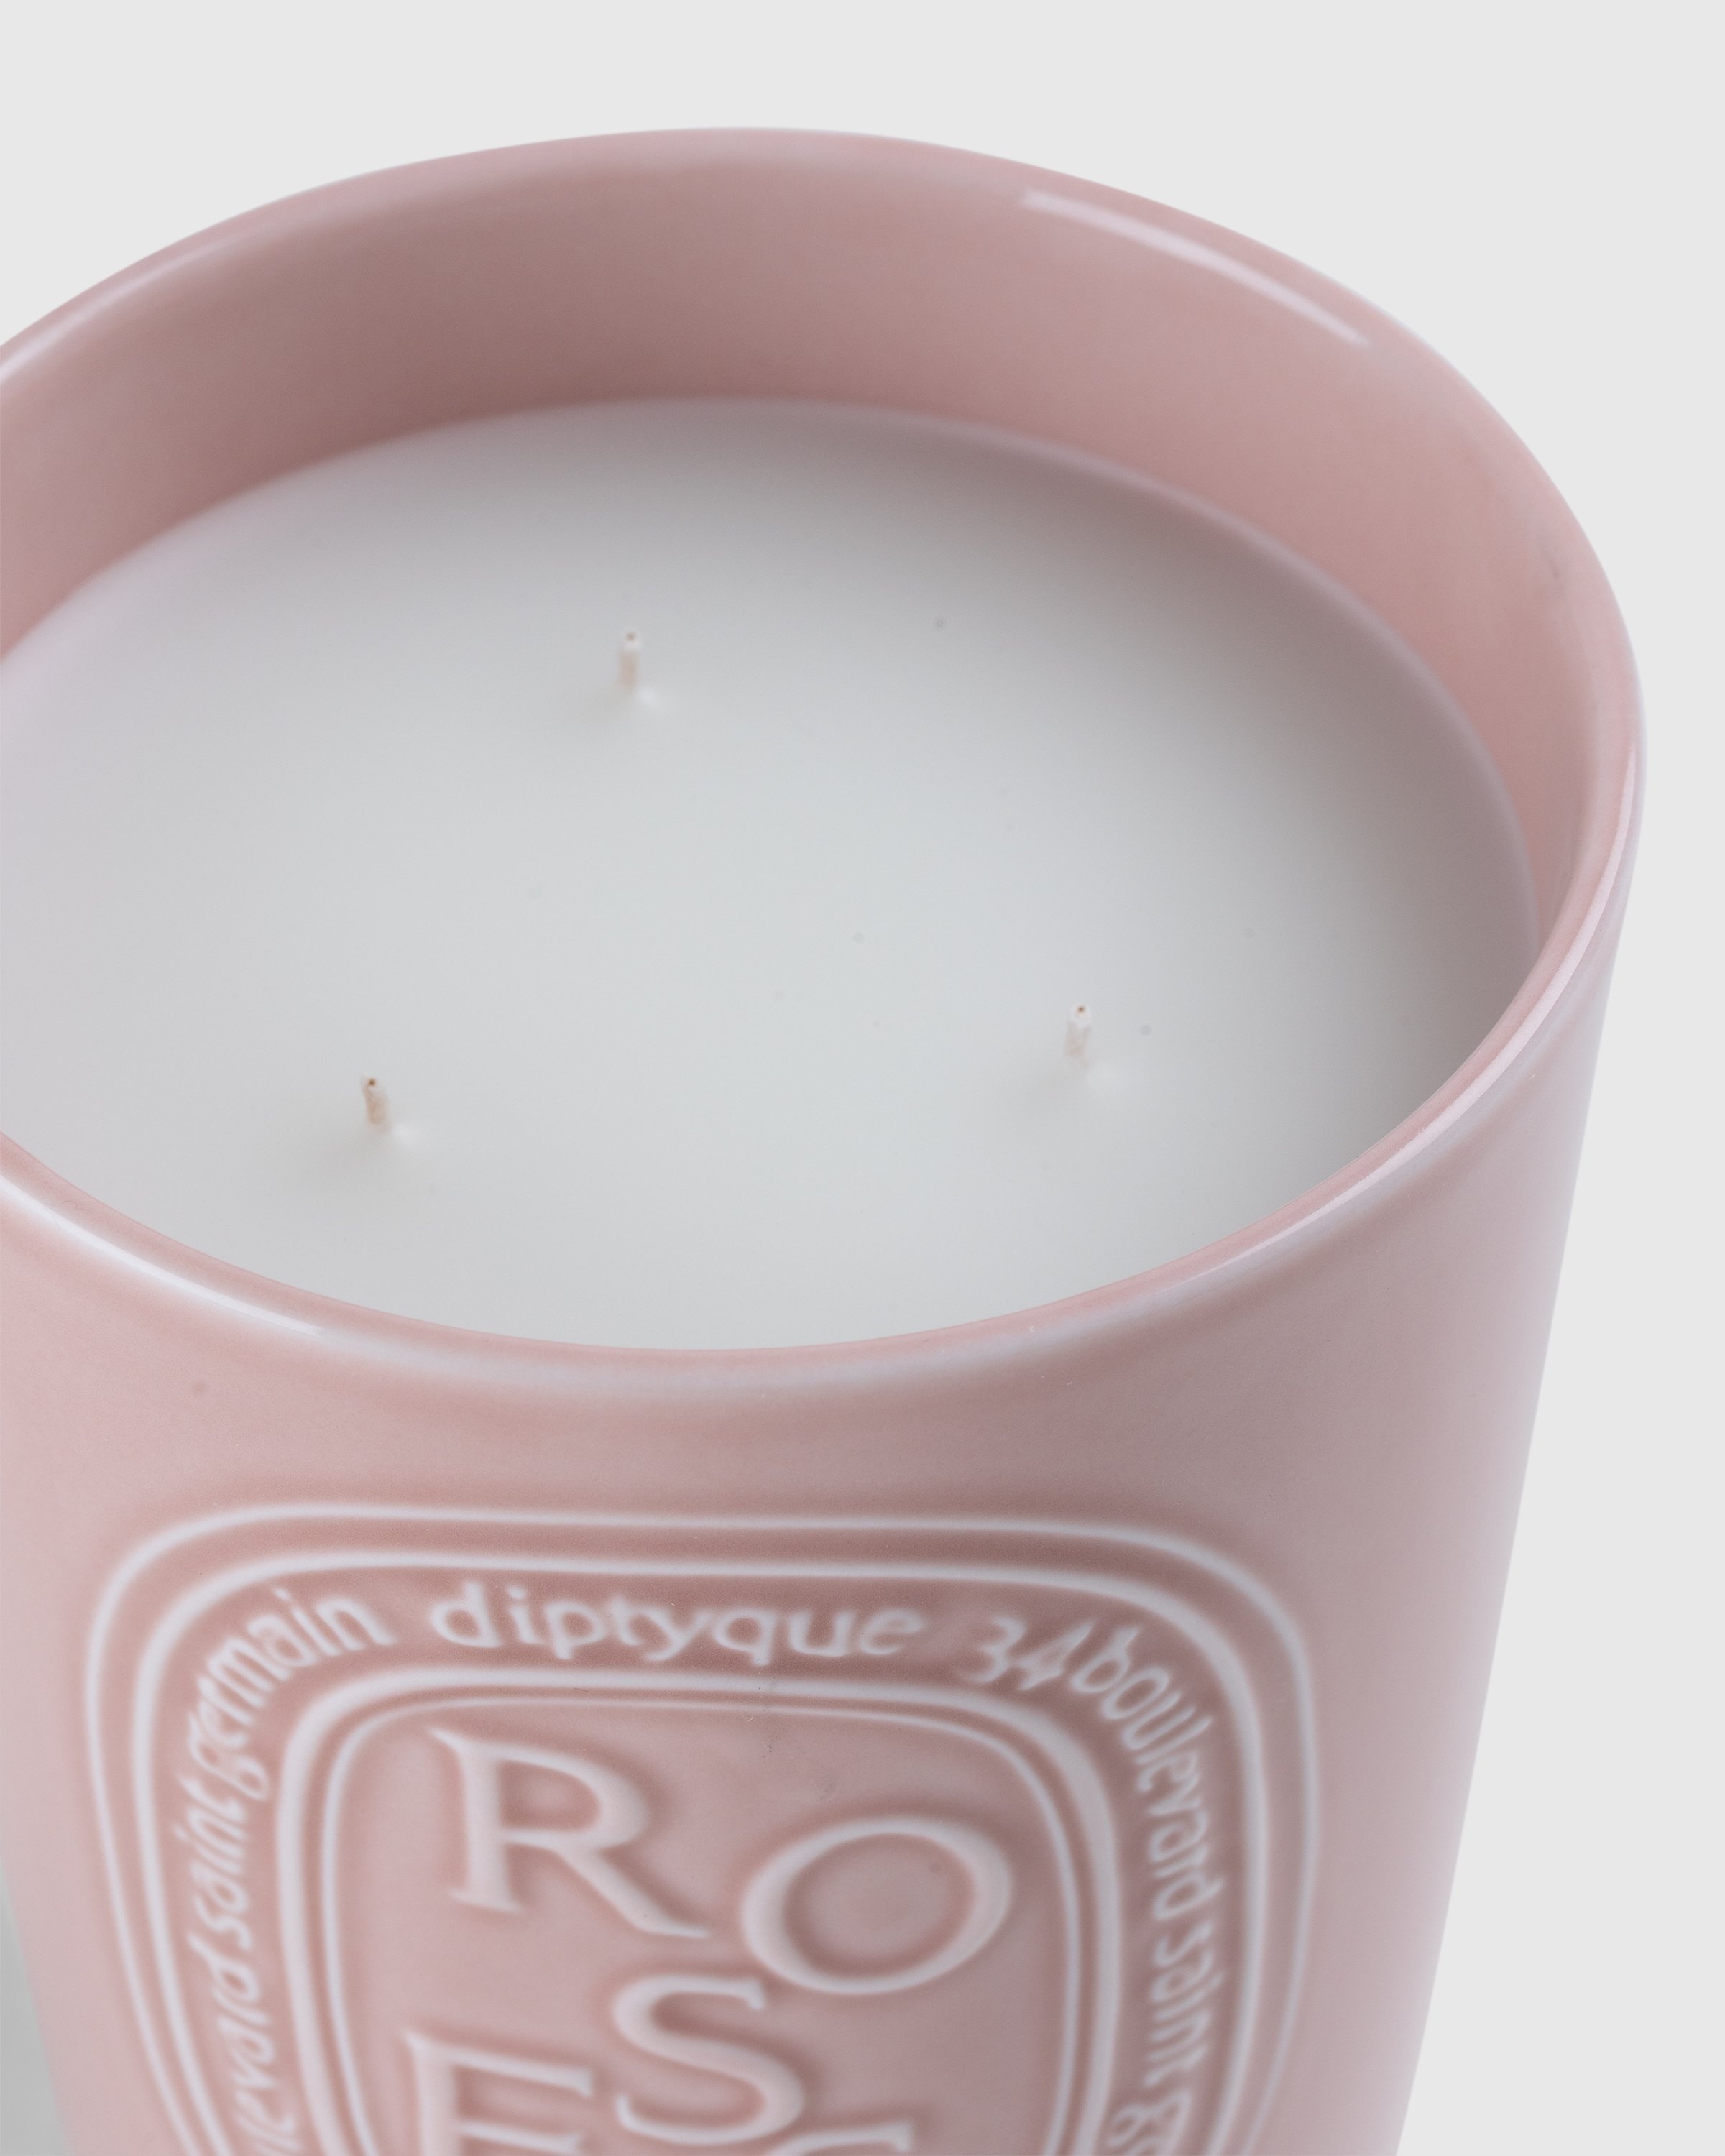 Diptyque – Candle Roses 600g - Candles & Fragrances - Pink - Image 2